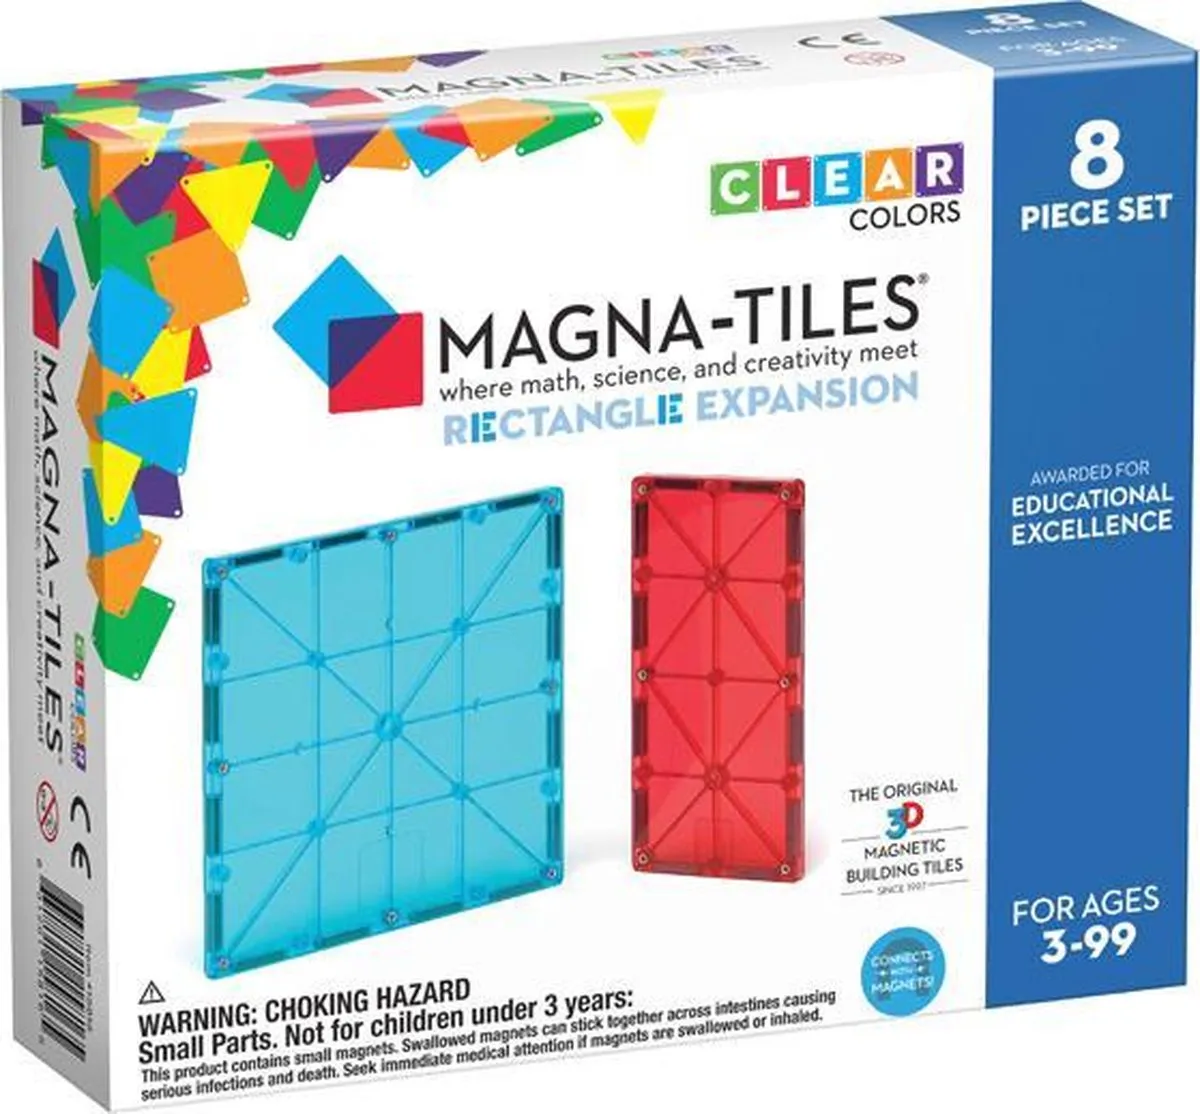 Magna-Tiles  Clear Colors Rectangles Expansion Set speelgoed